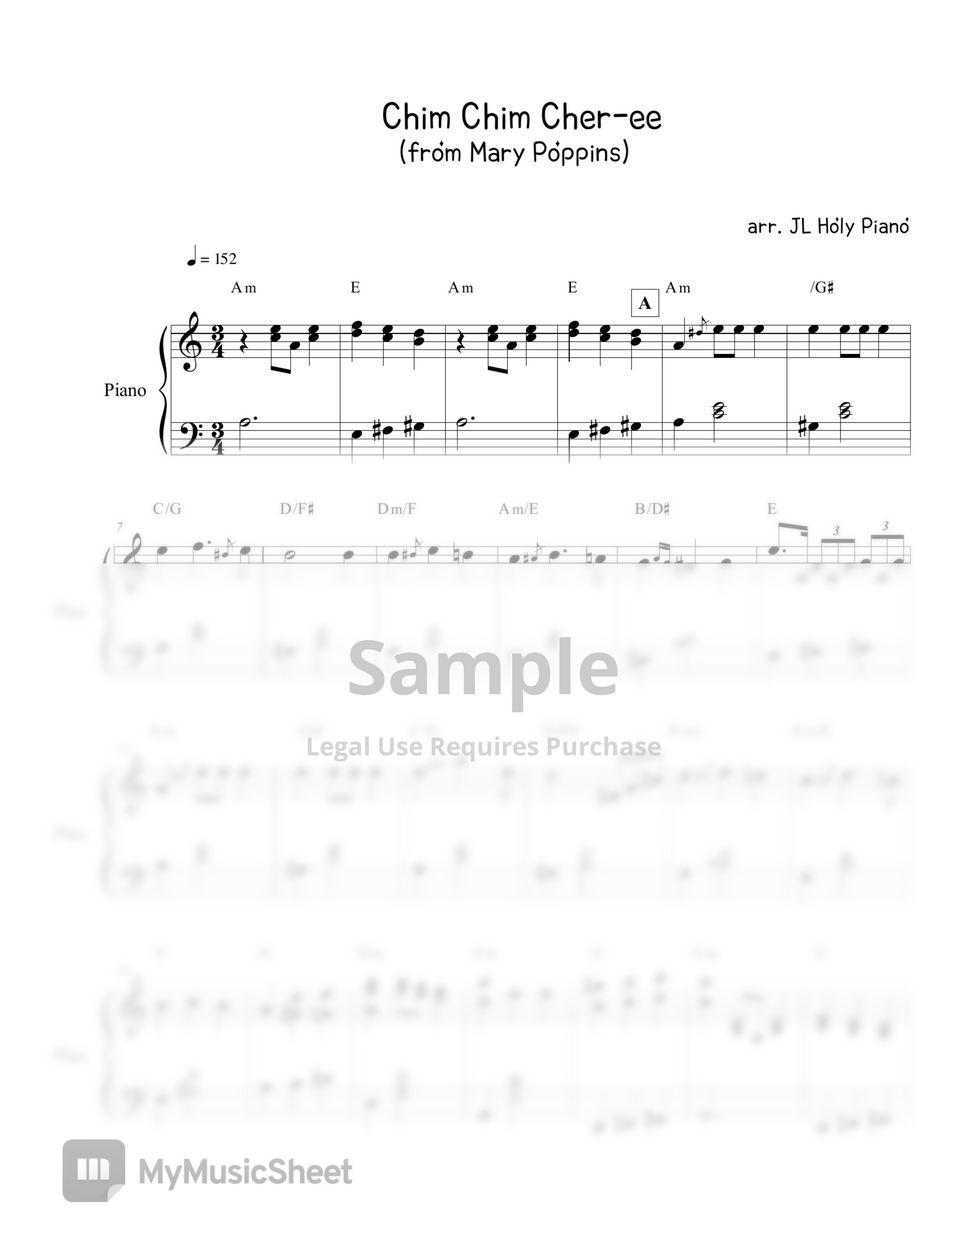 Mary Poppins - chim chim cher-ee by JL Holy Piano